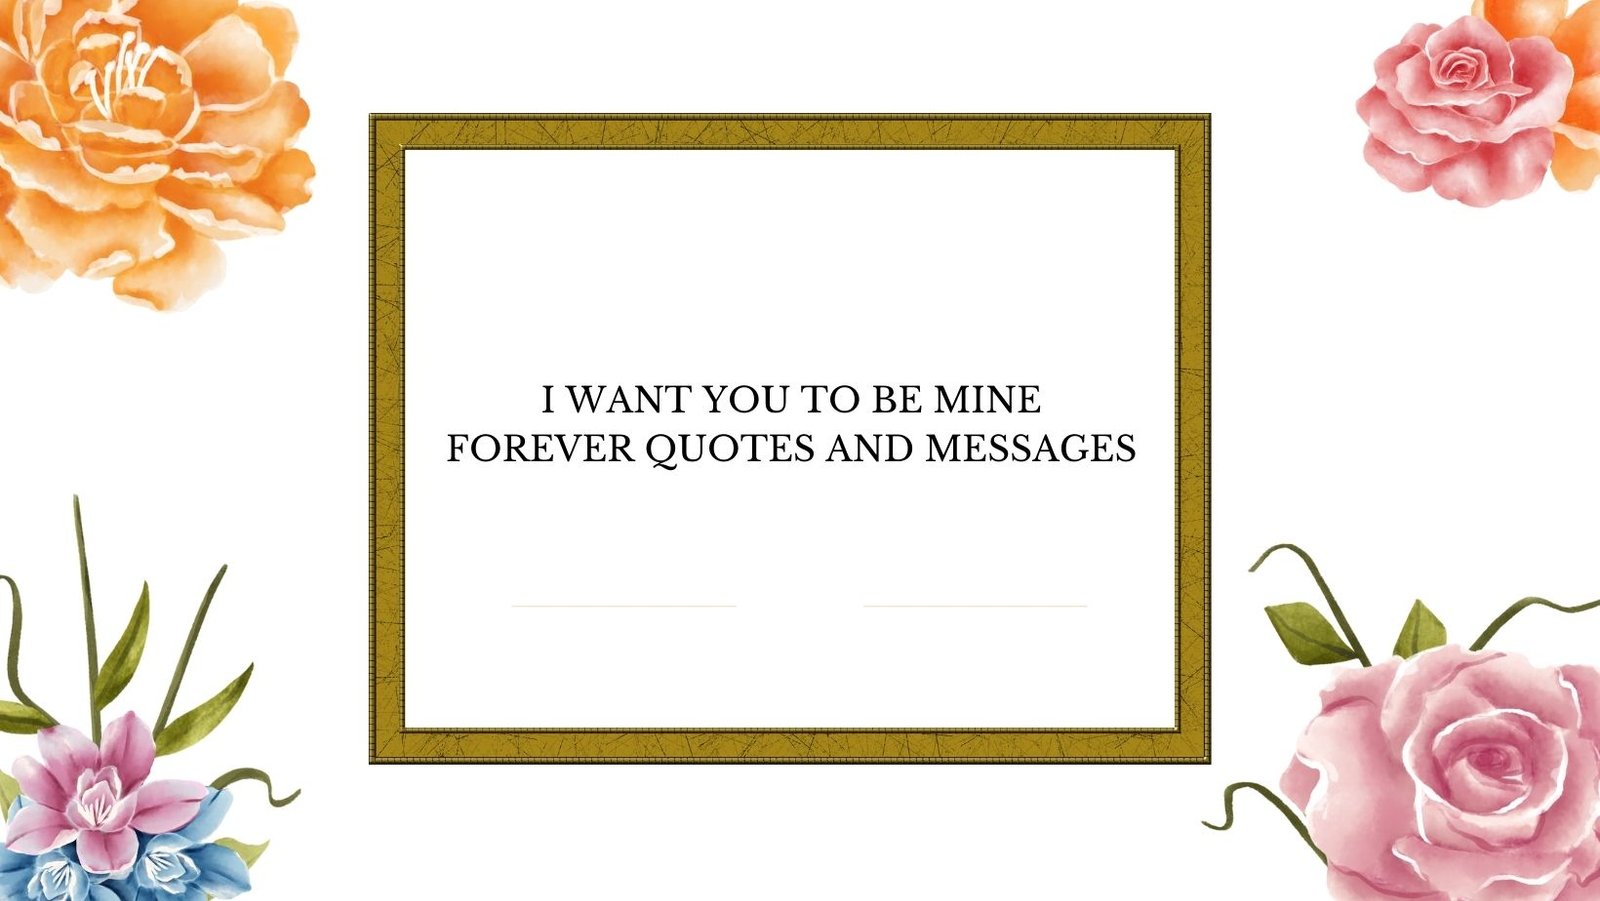 I Want You to Be Mine Forever Quotes and Messages